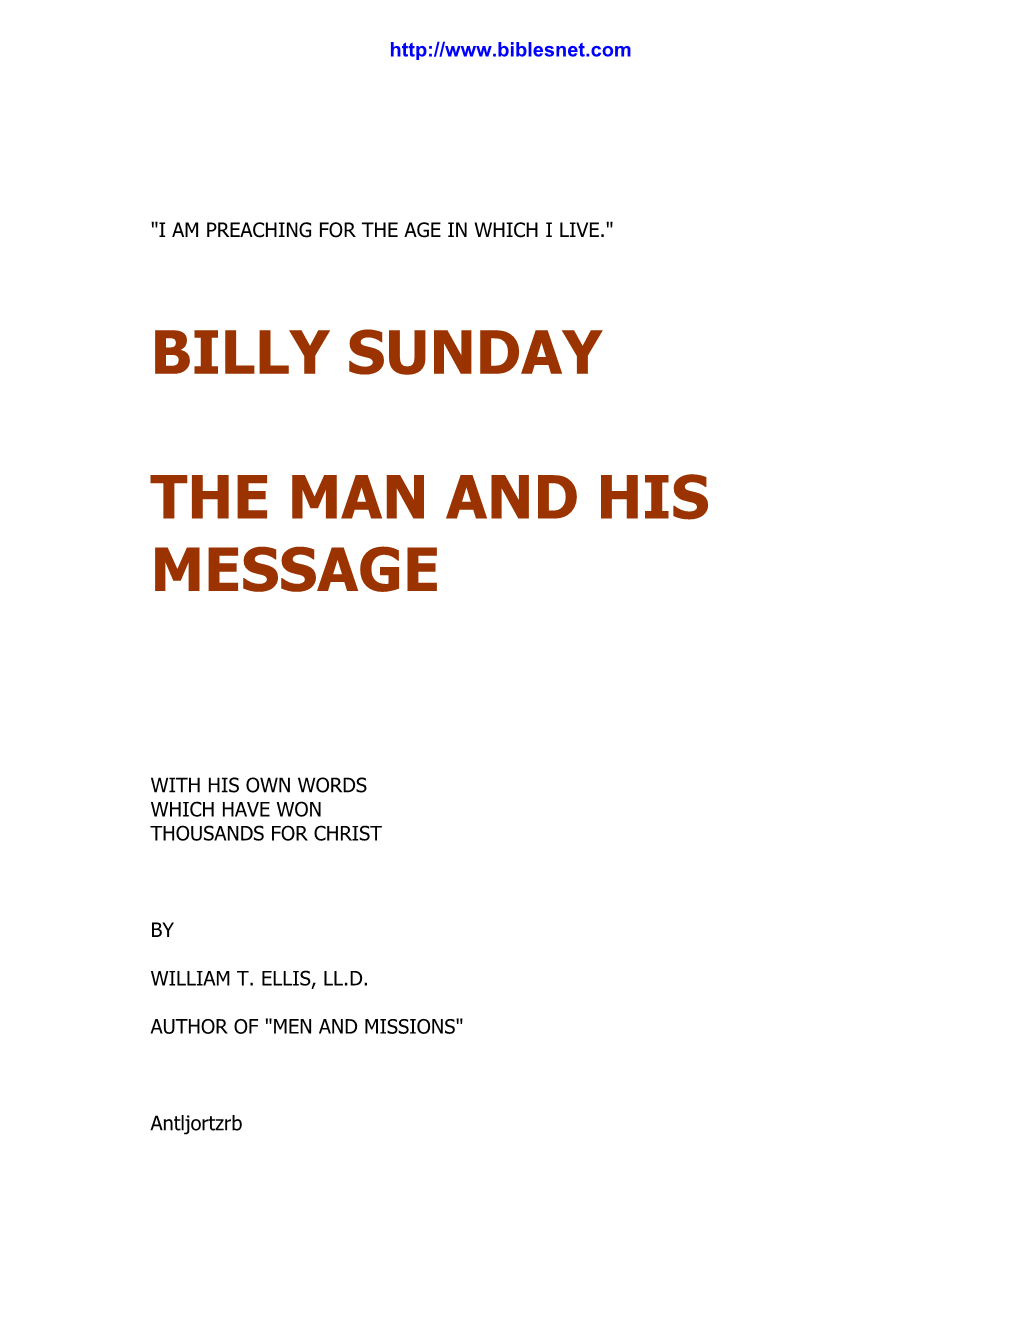 Billy Sunday the Man and His Message